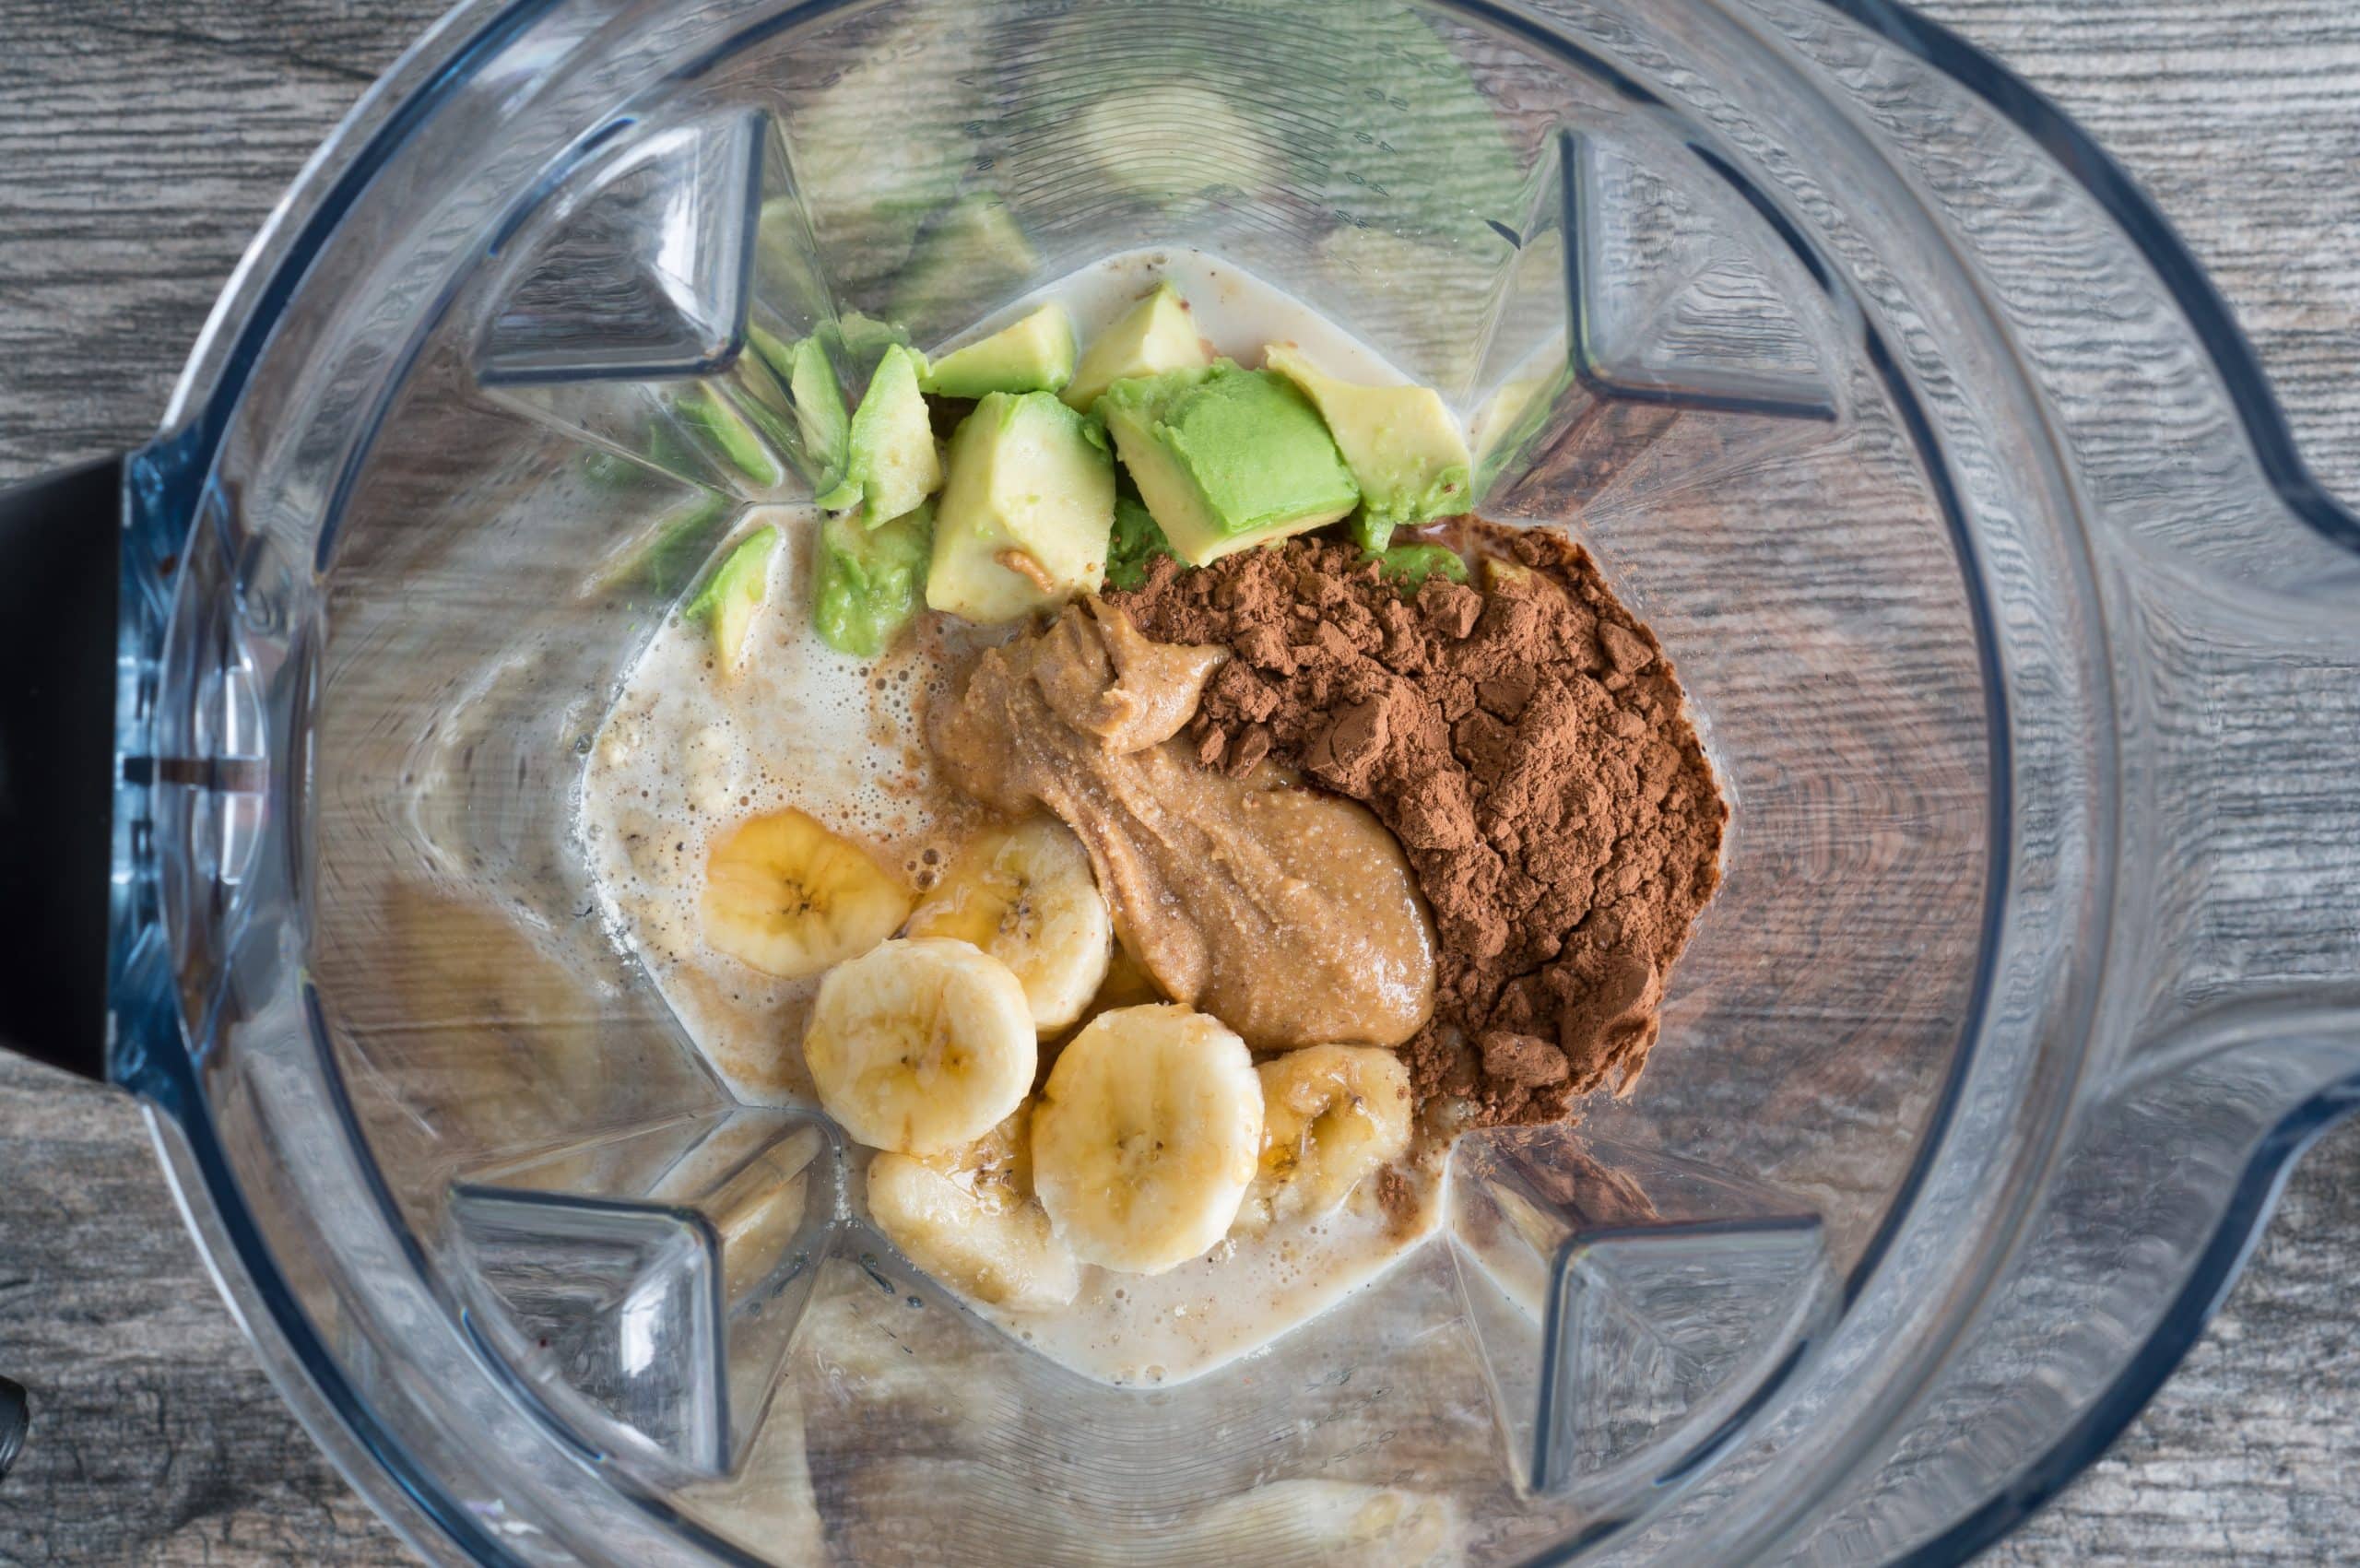 top down view of a clear blender cup filled with sliced bananas, peanut butter, cocoa powder and avocado